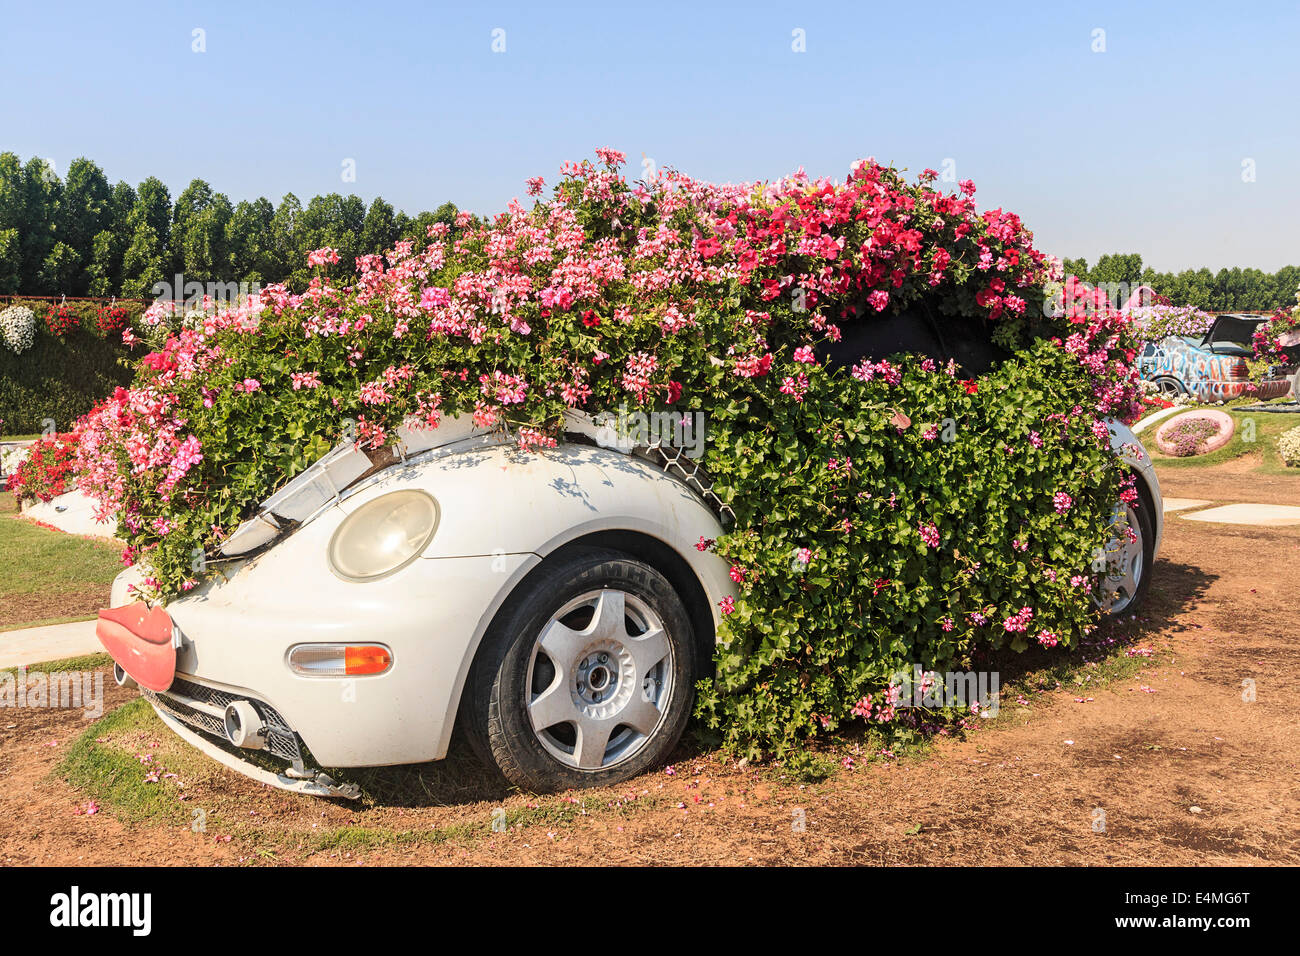 Car Covered In Flowers High Resolution Stock Photography And Images Alamy